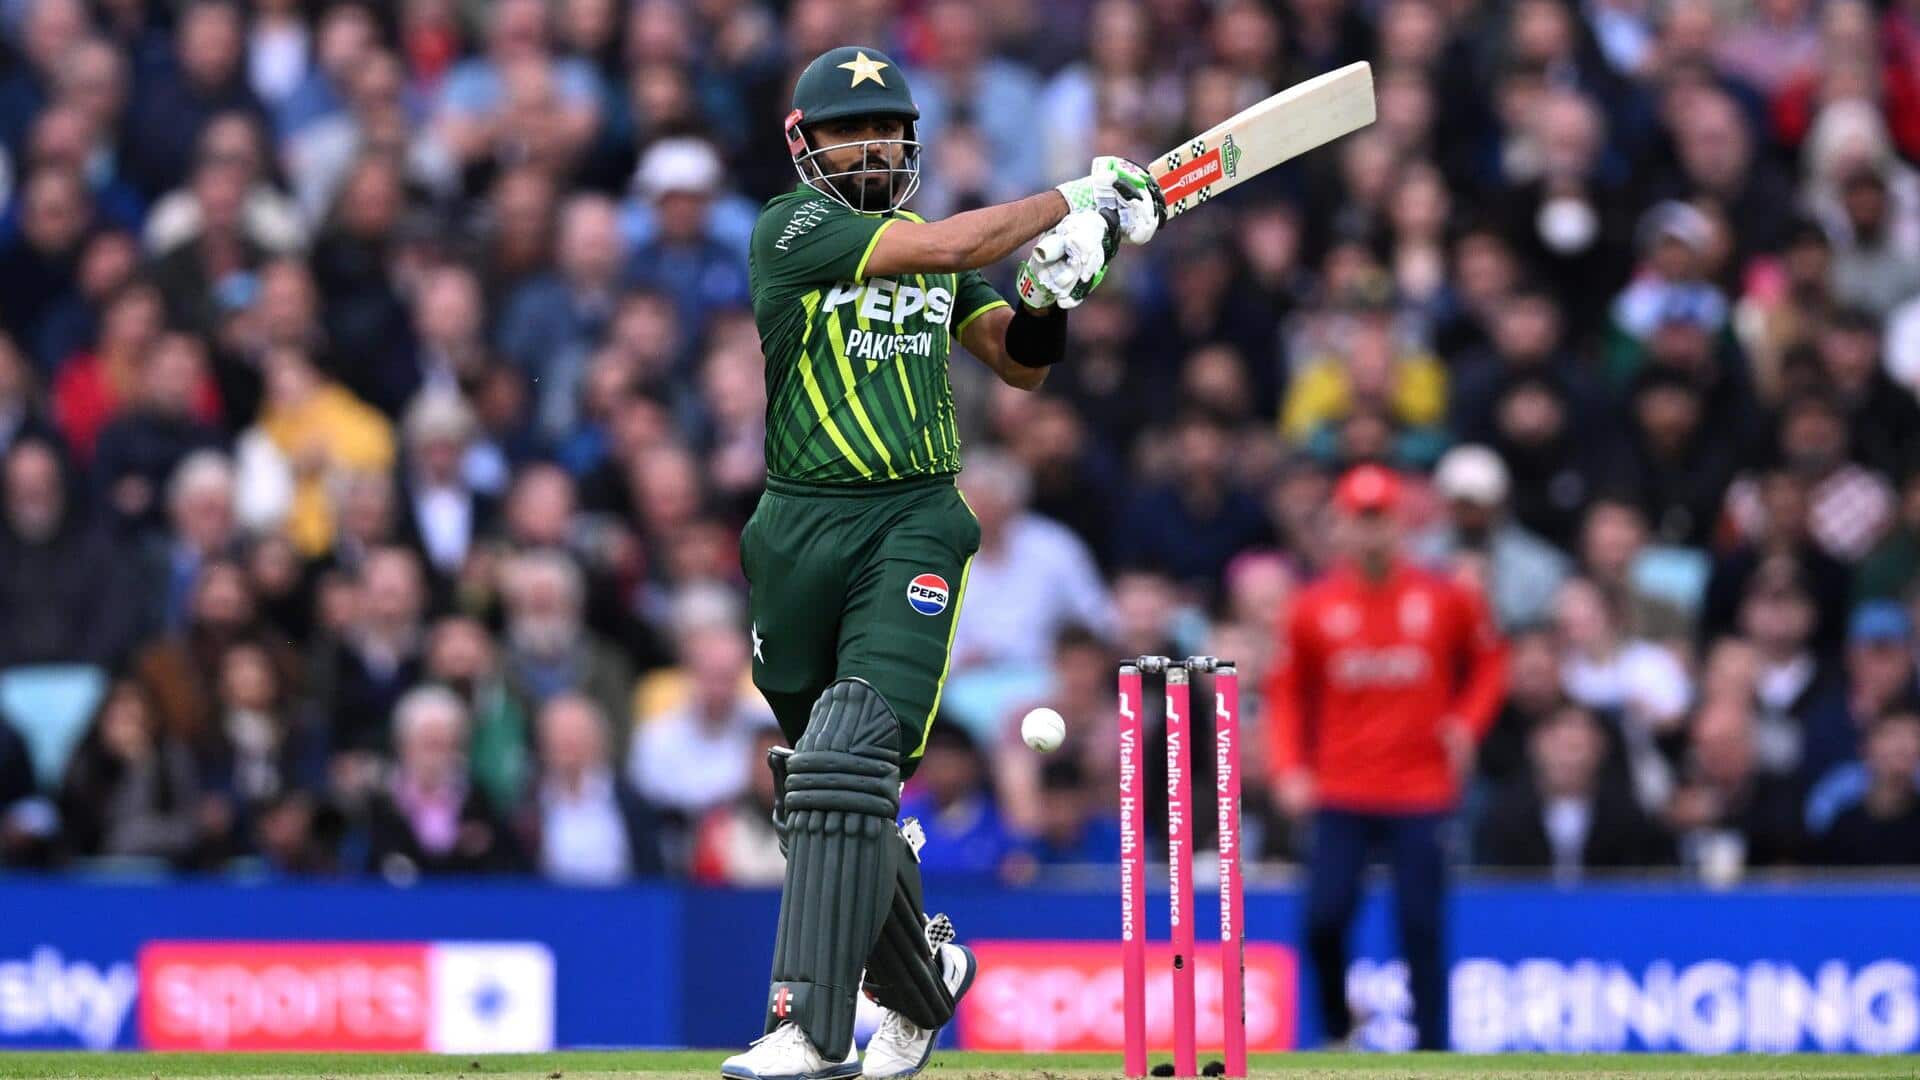 England humble Pakistan in 4th T20I, win series 2-0: Stats